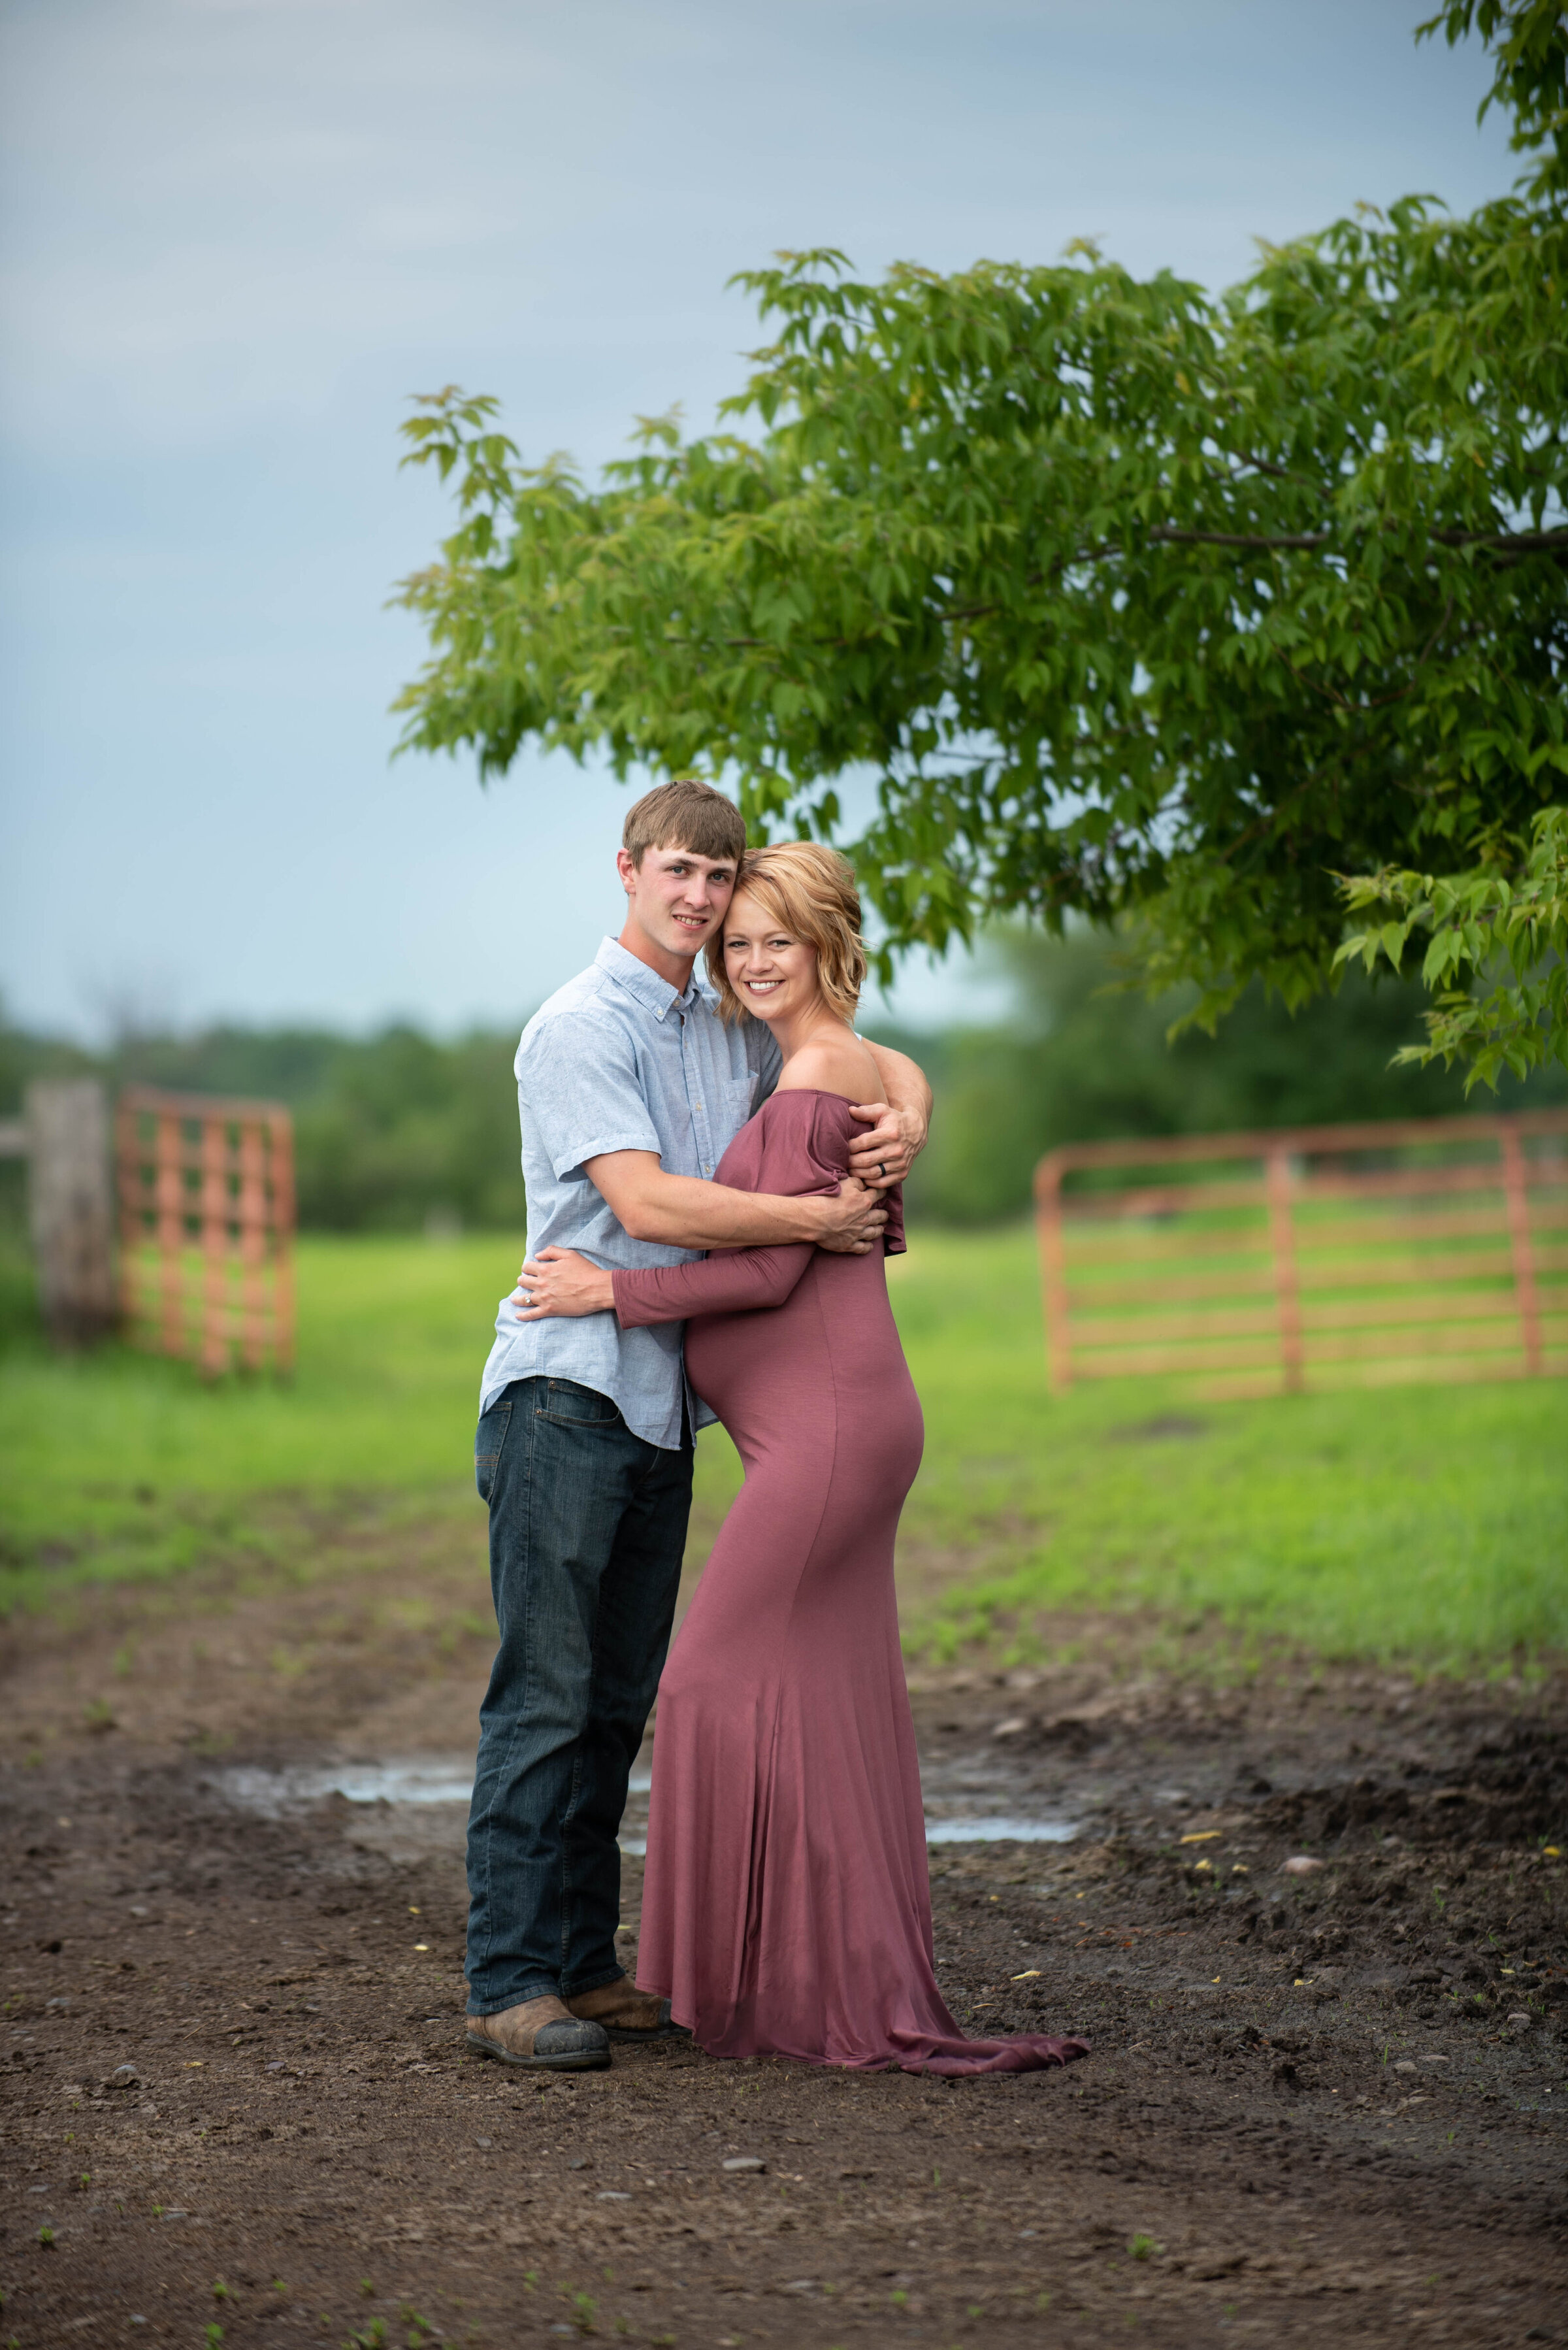 Maternity and Pregnancy photographers